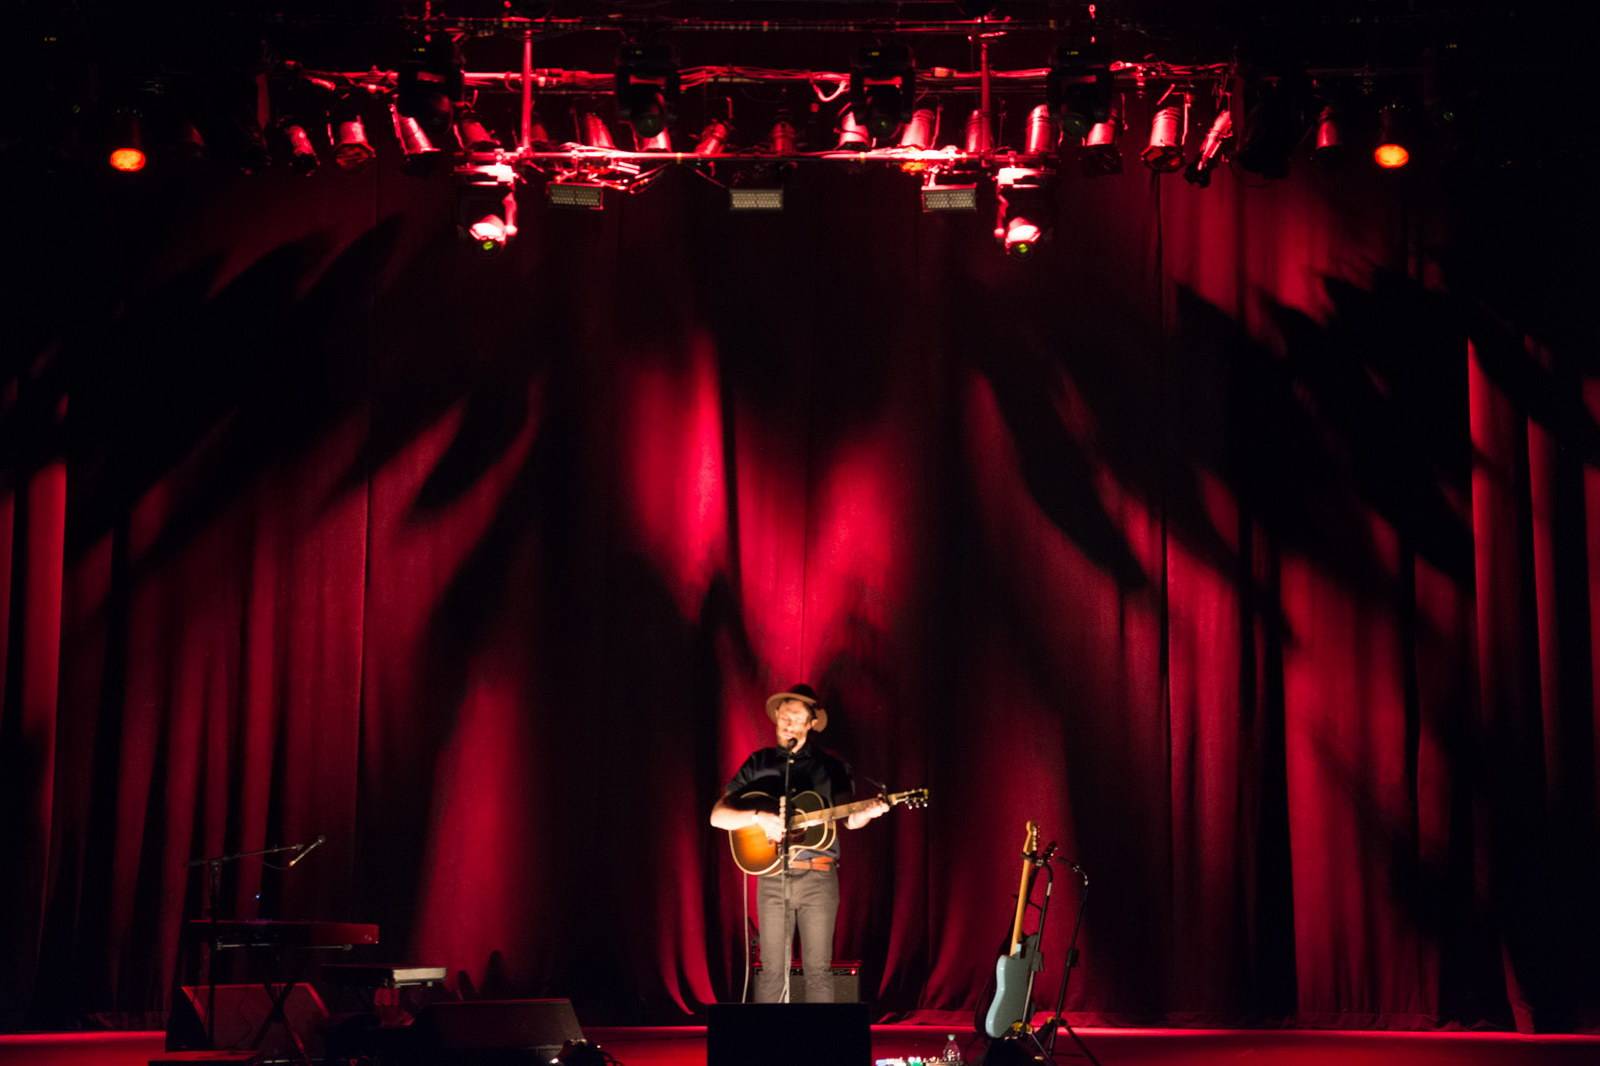 James Vincent McMorrow at the Vogue Theatre, Vancouver, Feb. 26 2015. Pavel Boiko photo.